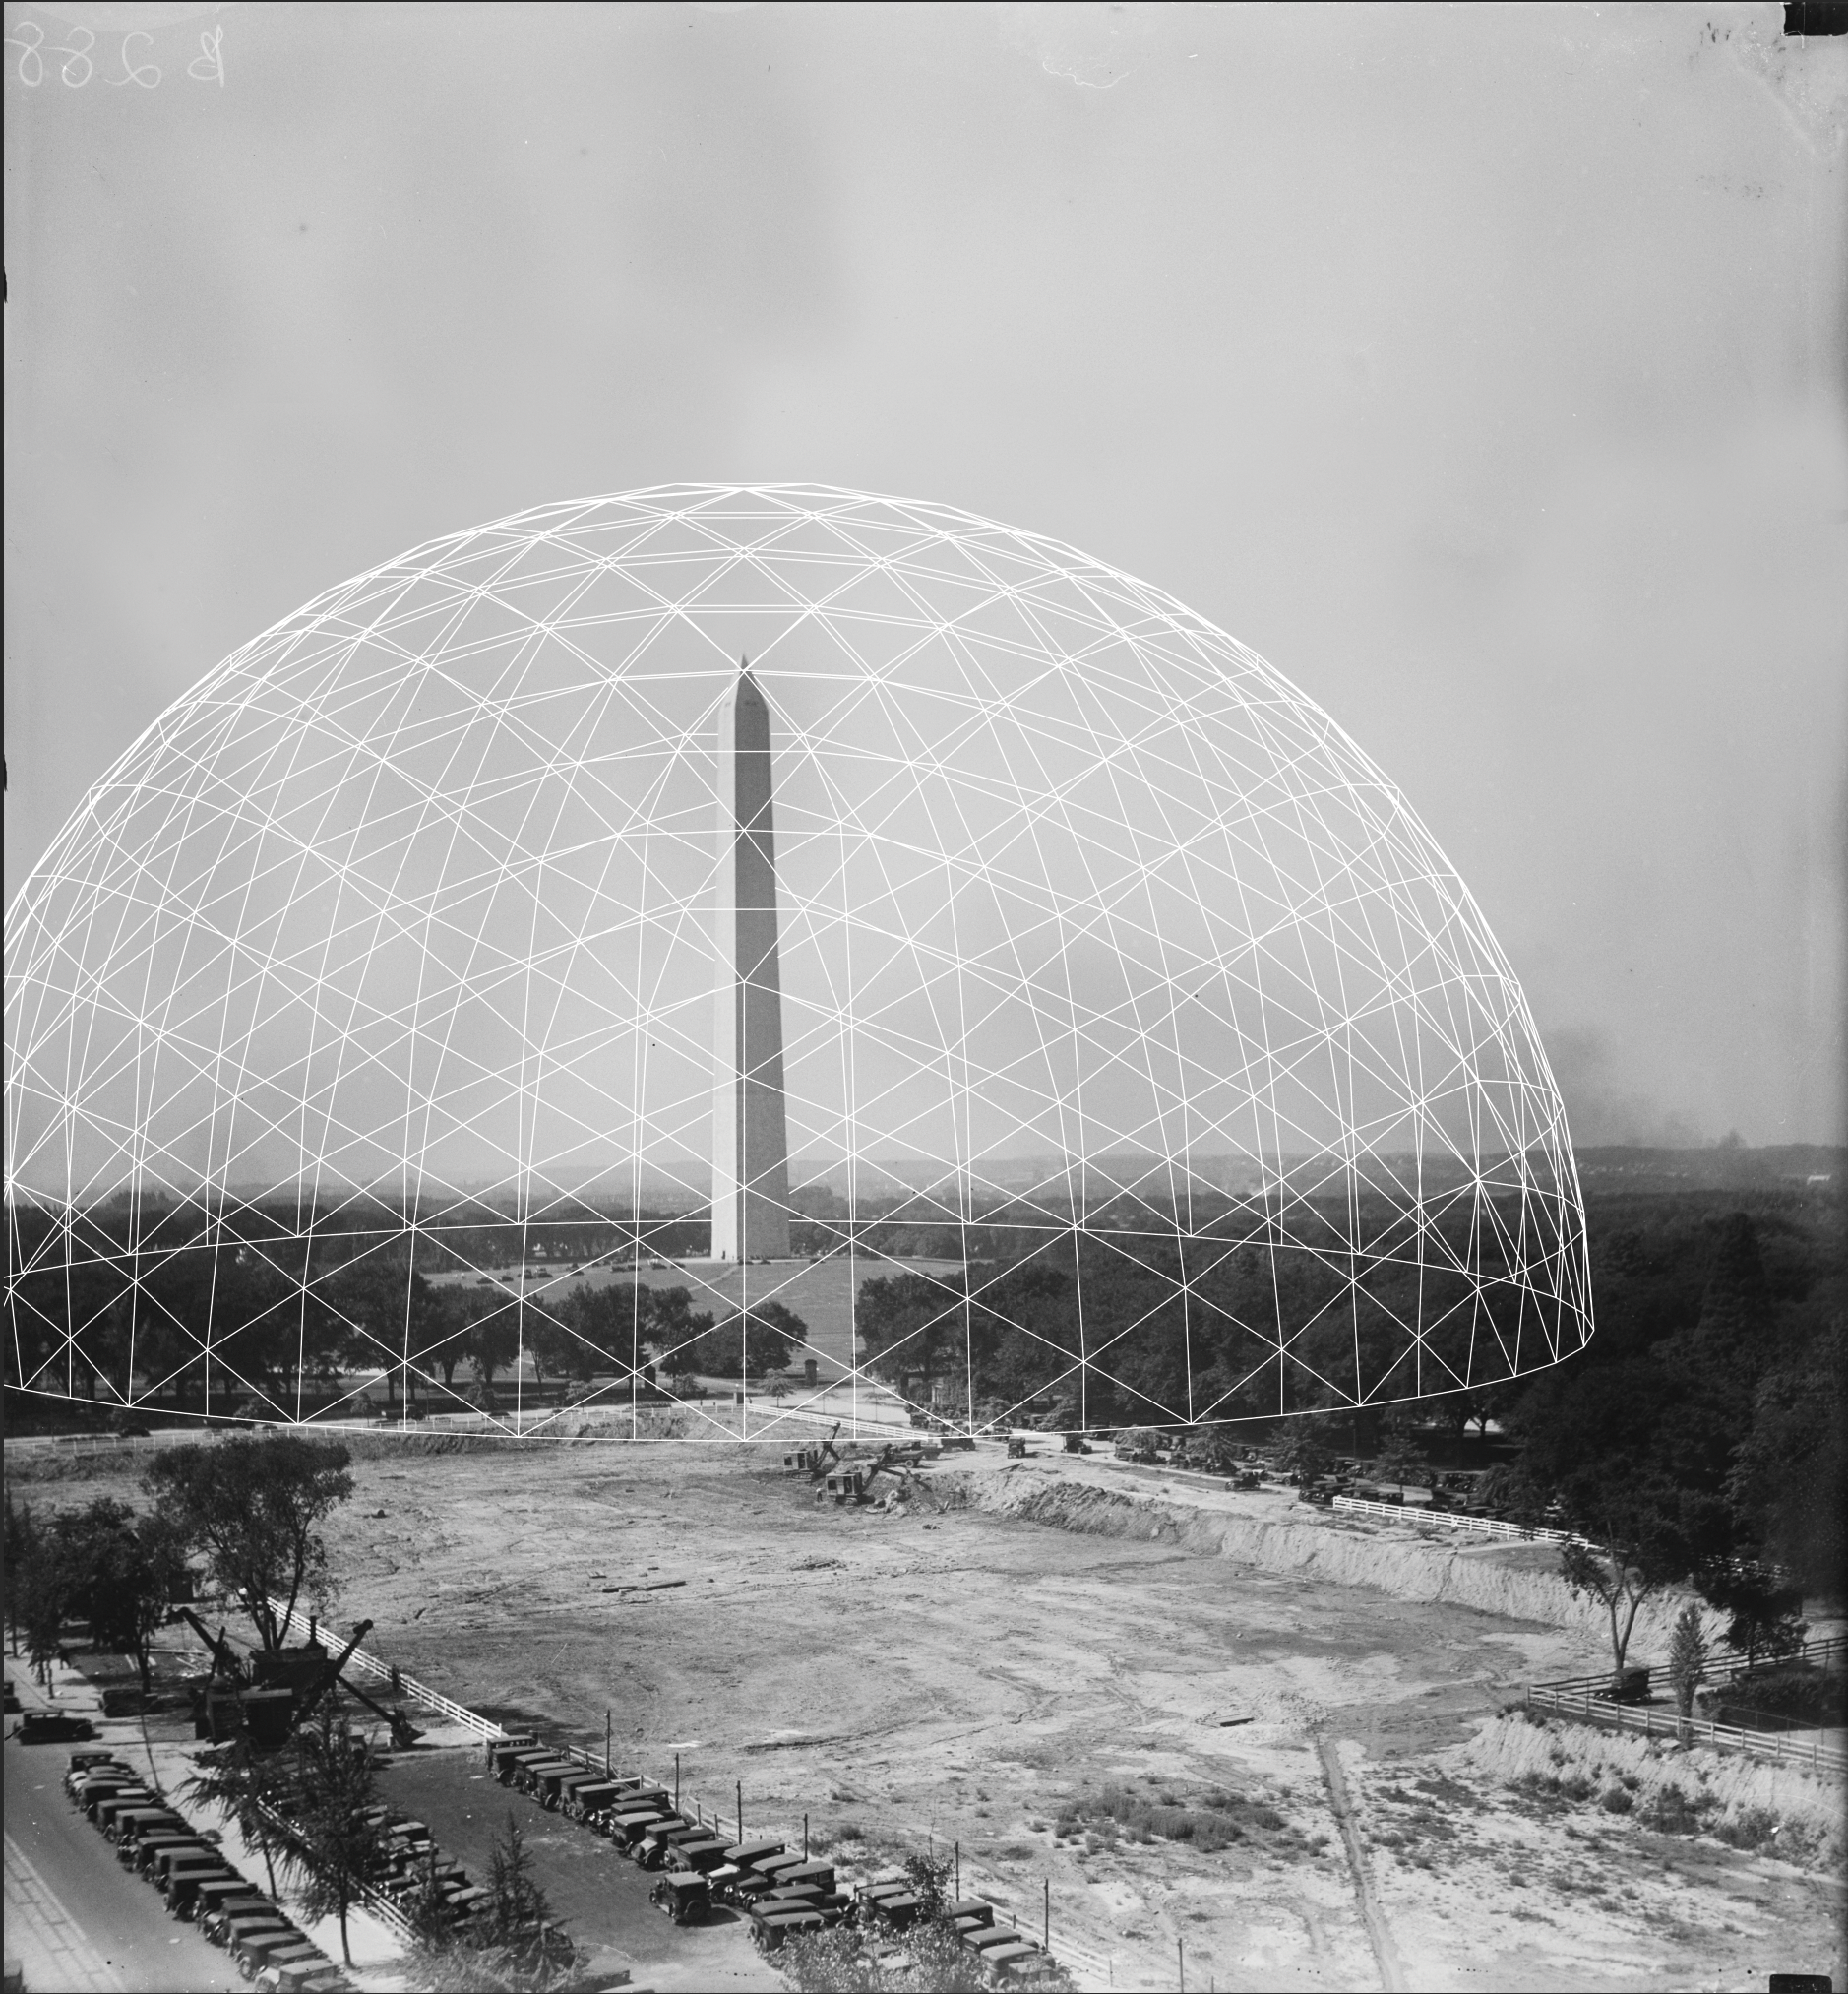 Photograph of the Washington Monument enclosed by a white open air dome.